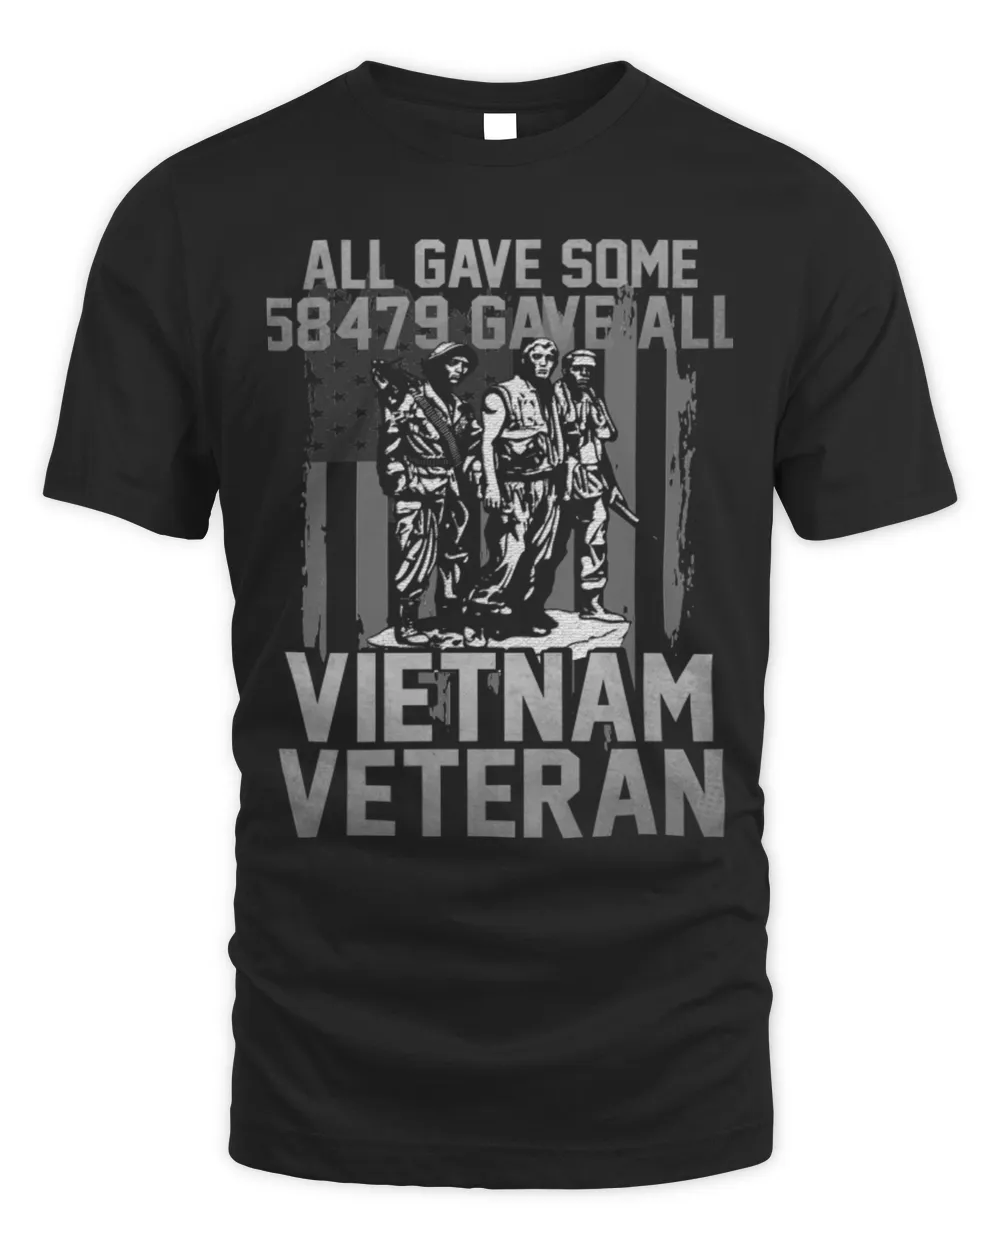 Vietnam Veteran All Gave Some 58479 Gave All T-Shirt with Three Soldiers Statue